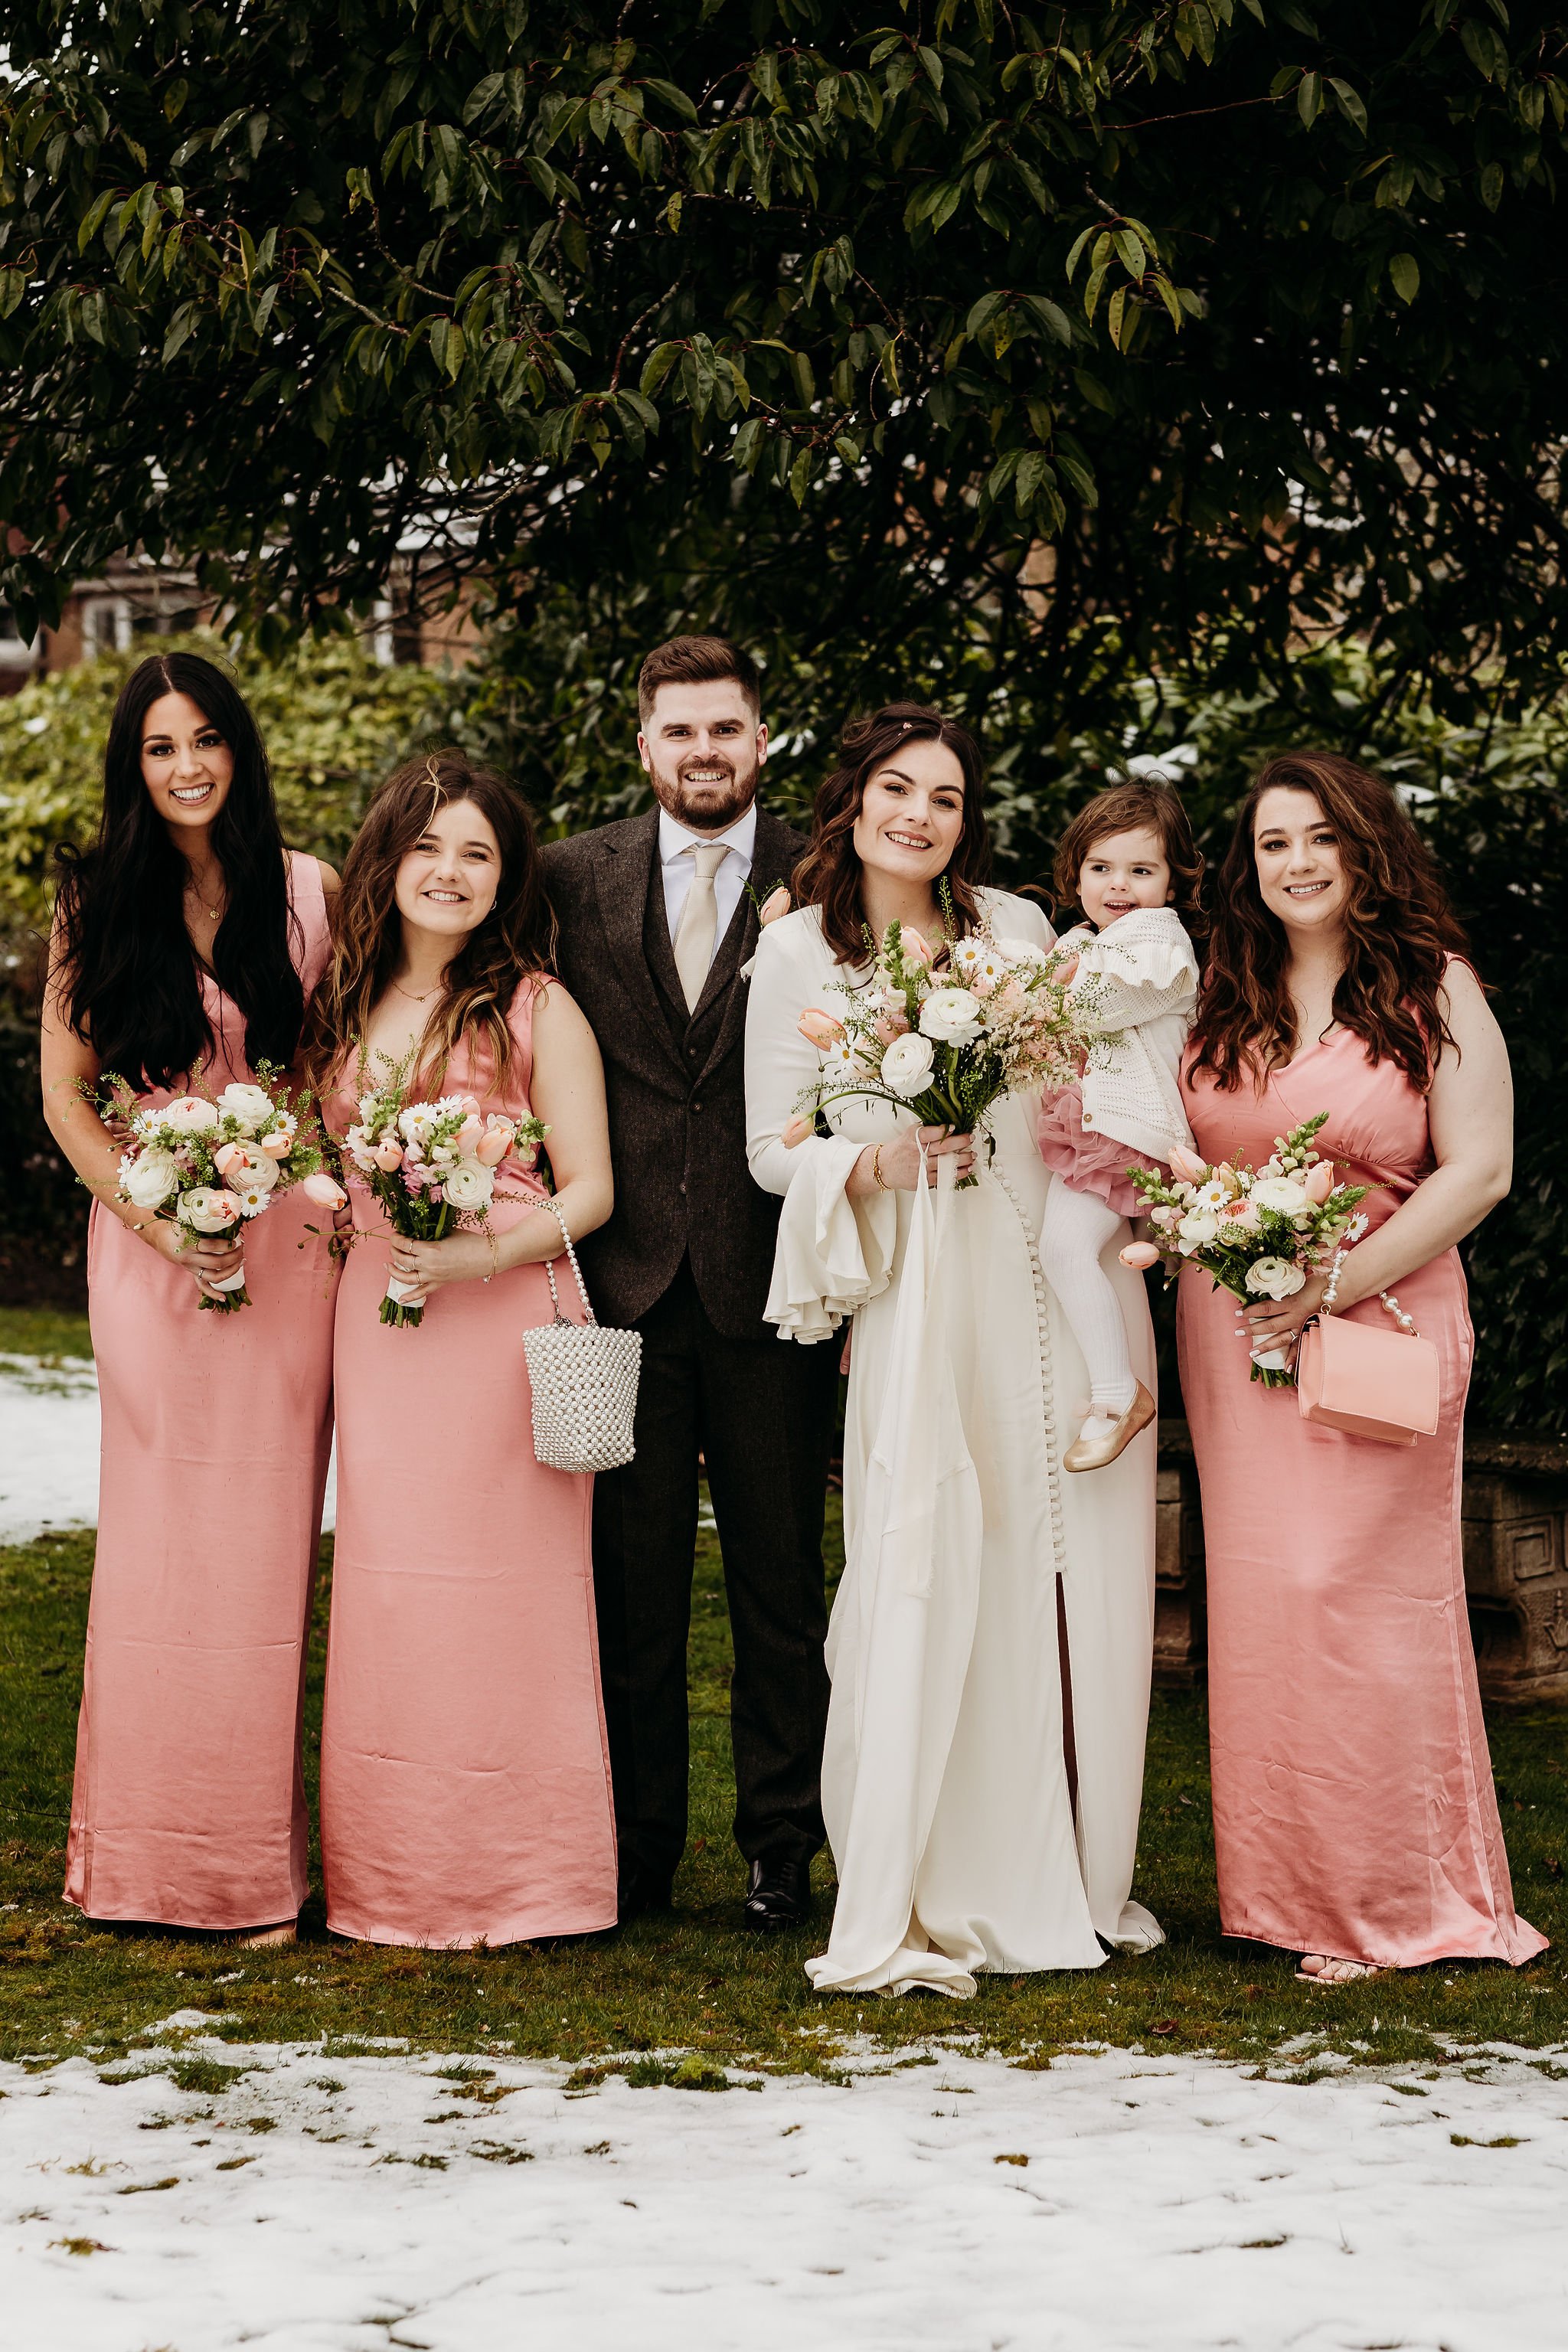  Beautiful wedding florals compliment the bridal party’s bridesmaid dresses, the bride’s wedding dress and the groom’s tie and  complete the floral wedding look. The bride and bridesmaid’s are all stood holding the pink and cream hand tied bouquet’s 